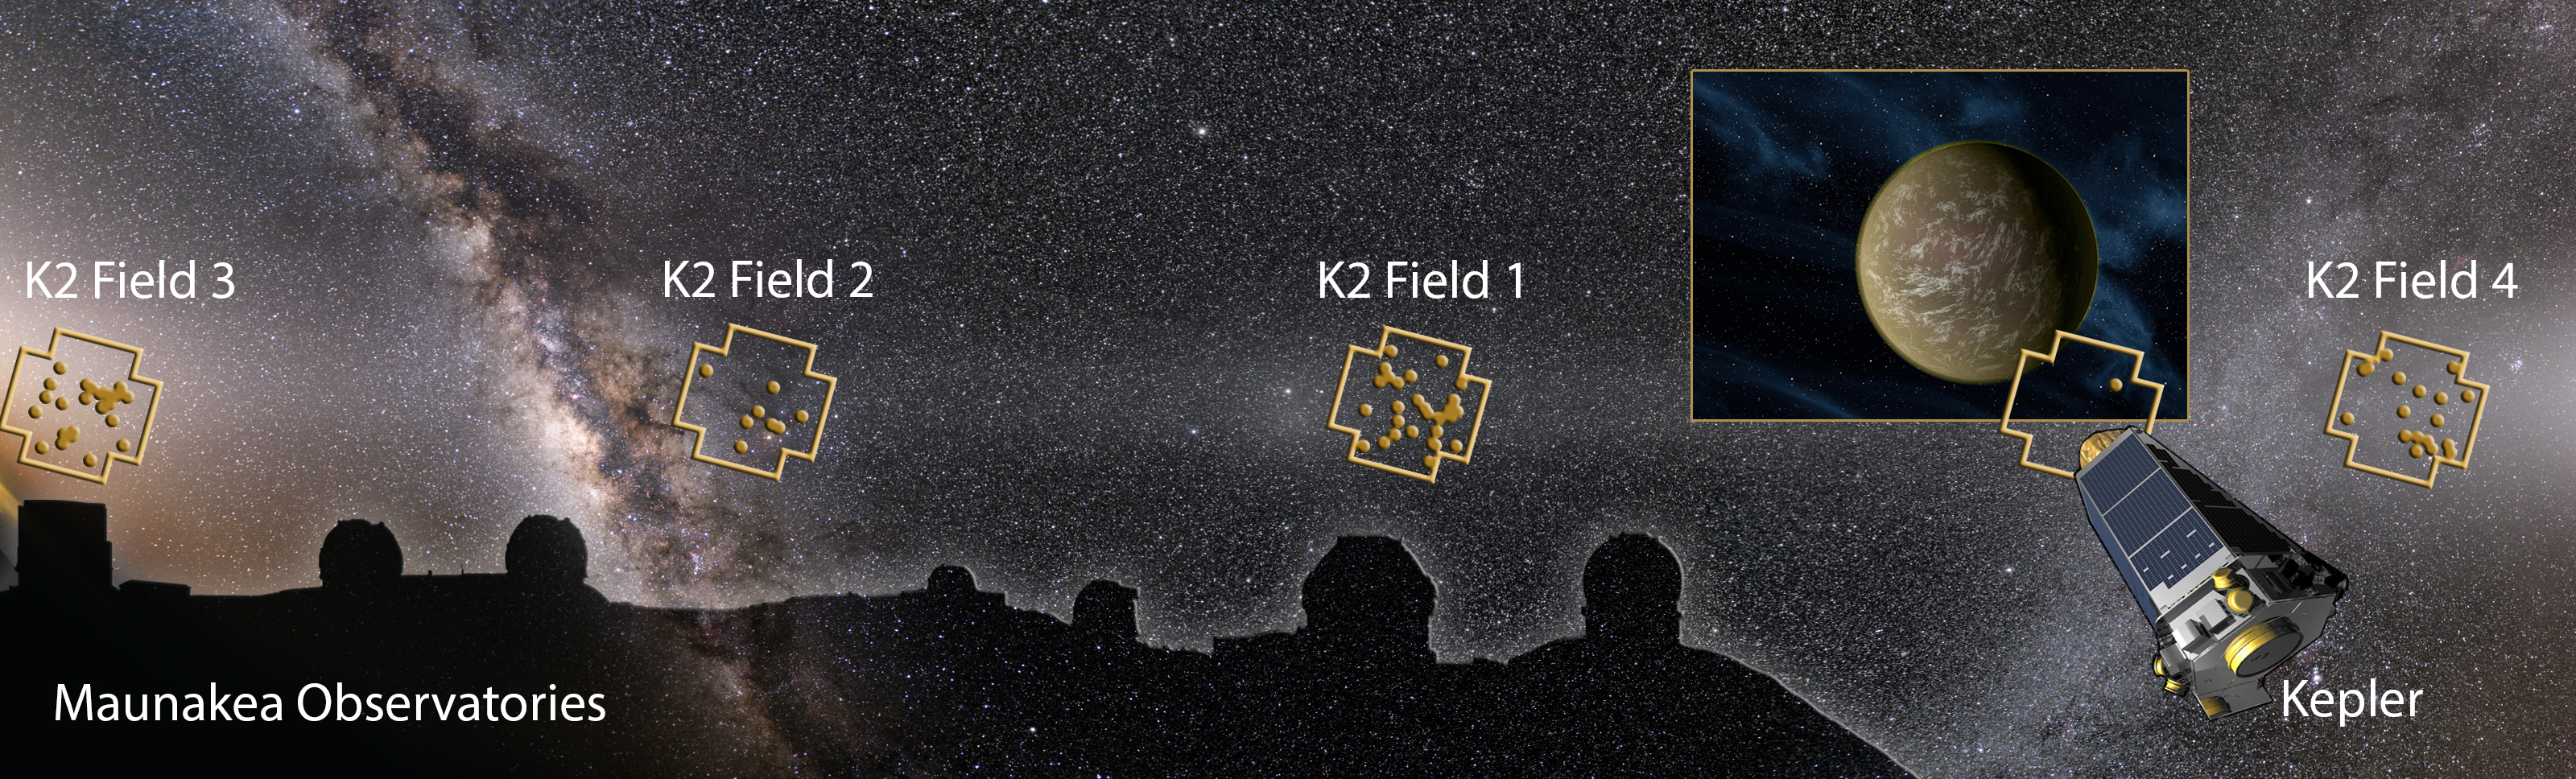 Image montage showing the Maunakea Observatories, Kepler Space Telescope, and night sky with K2 Fields and discovered planetary systems (dots) overlaid.